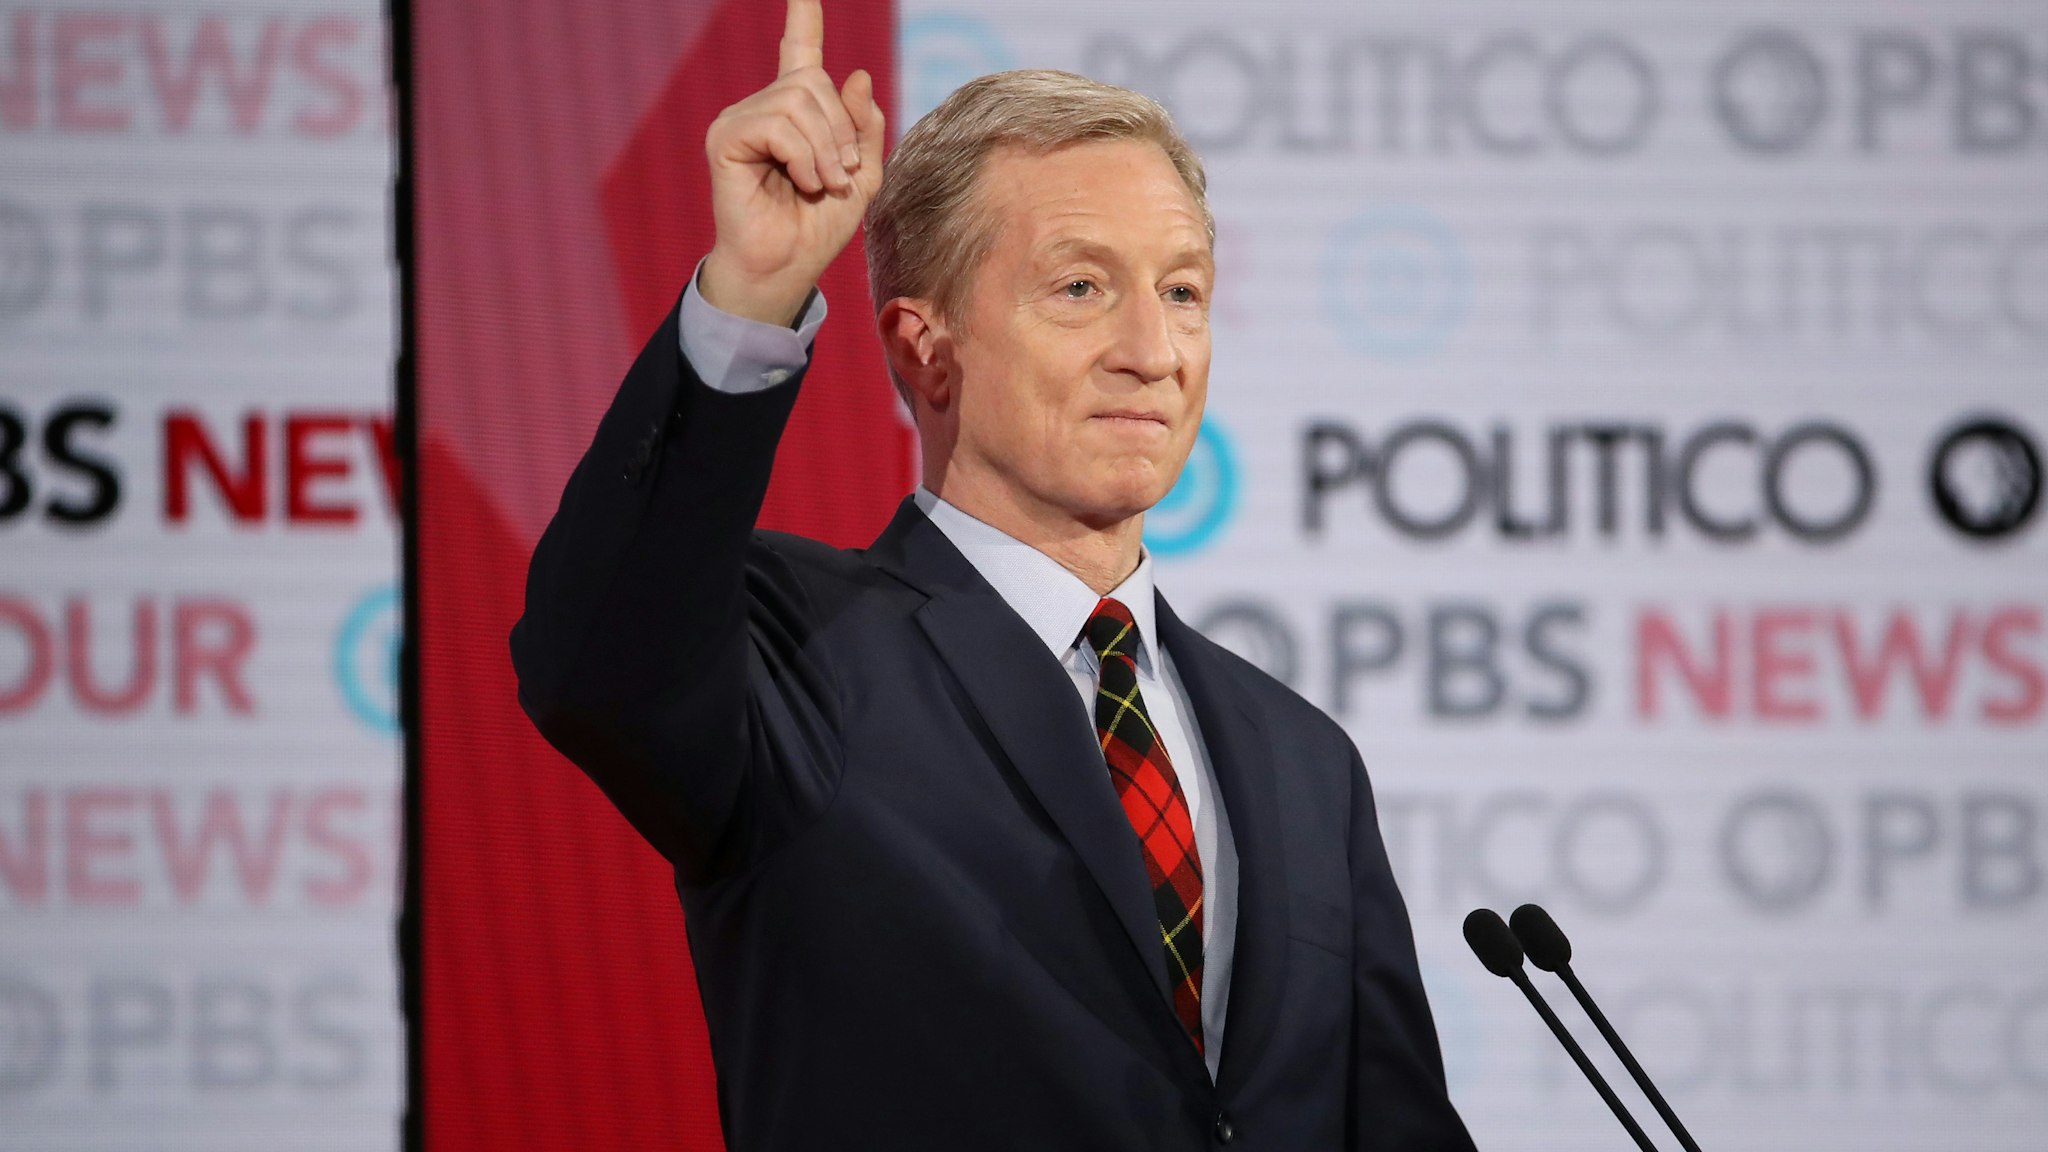 LOS ANGELES, CALIFORNIA - DECEMBER 19: Democratic presidential candidate Tom Steyer gestures during the Democratic presidential primary debate at Loyola Marymount University on December 19, 2019 in Los Angeles, California. Seven candidates out of the crowded field qualified for the 6th and last Democratic presidential primary debate of 2019 hosted by PBS NewsHour and Politico. (Photo by Justin Sullivan/Getty Images)